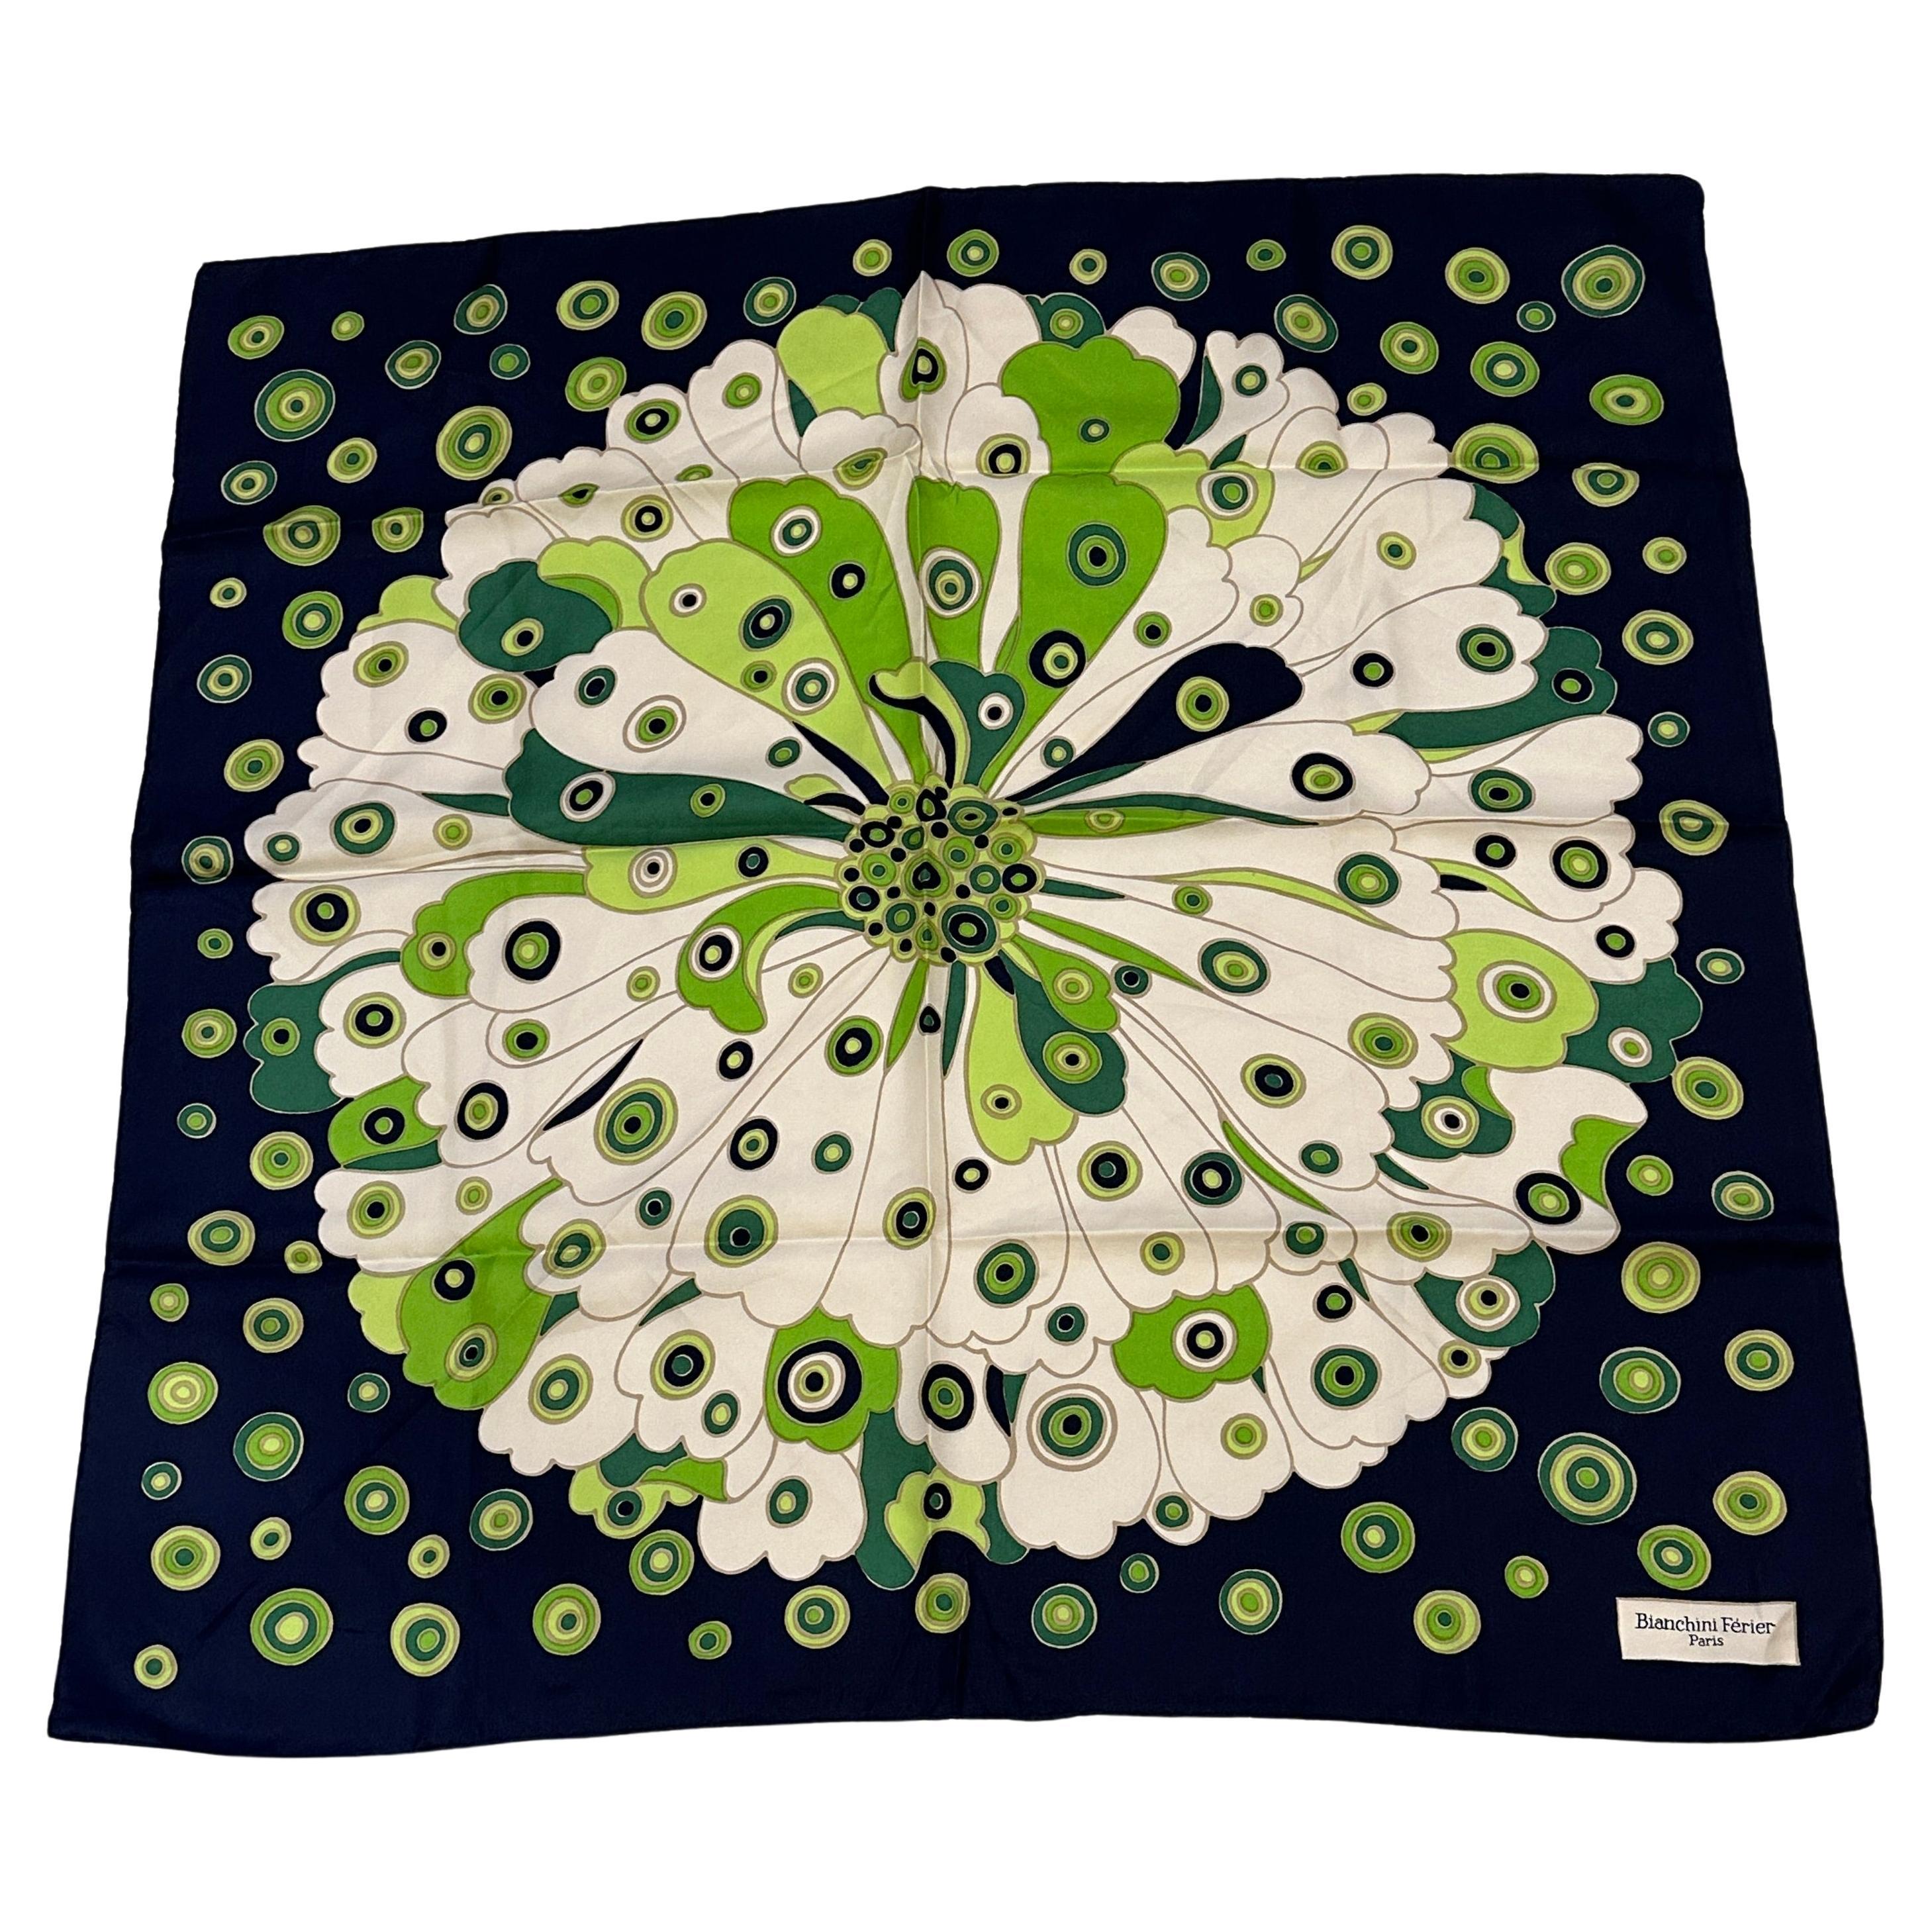 Bianchini Ferier "Super Blooming Floral" With Midnight Blue Border Silk Scarf For Sale